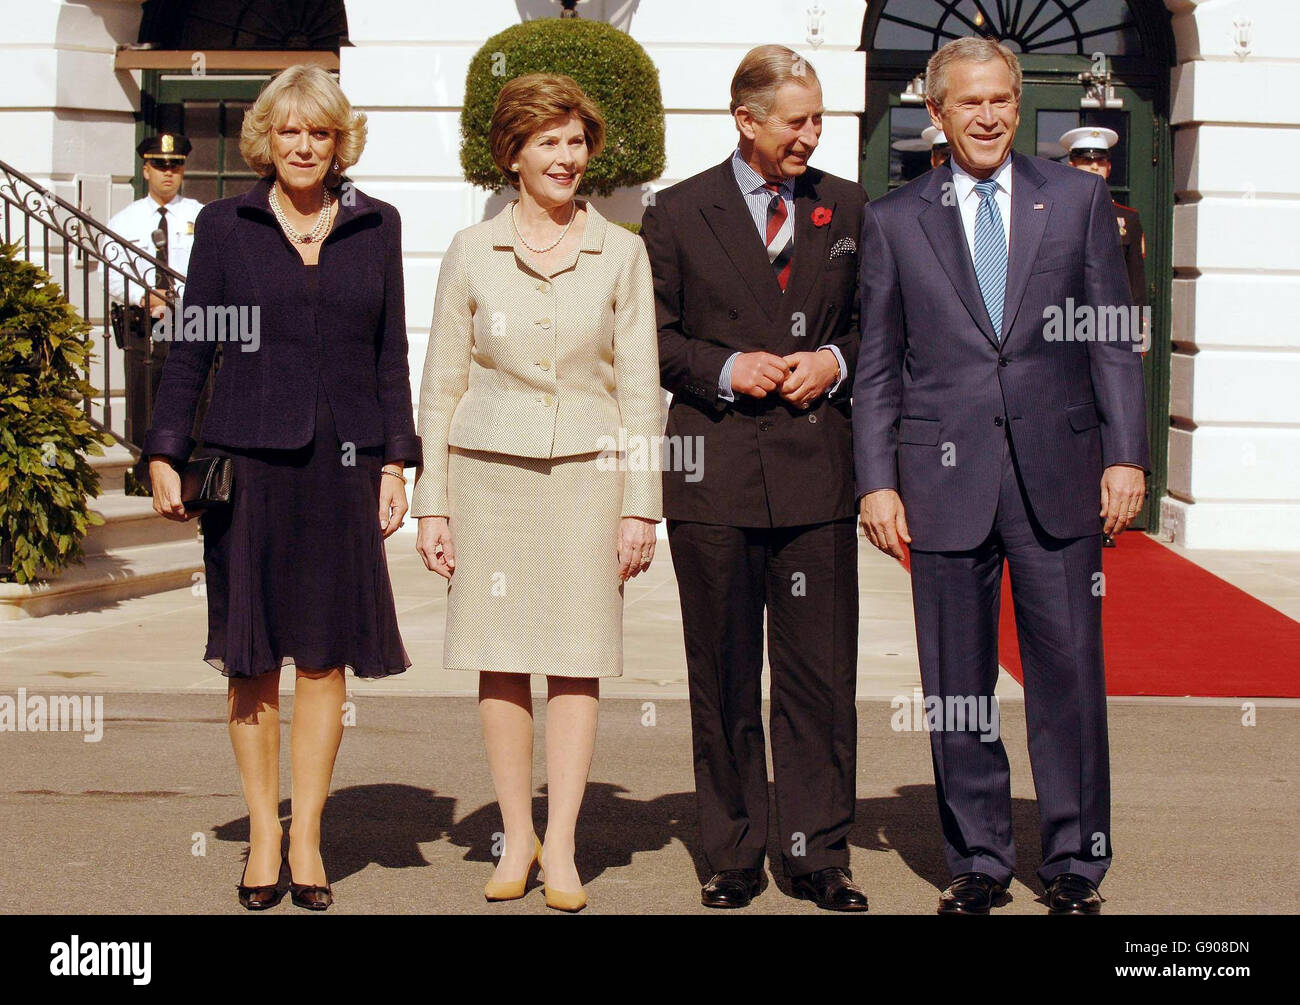 (L - r) The Duchess of Cornwall, Laura Bush, the Prince of Wales and President George W Bush on the South lawn of the White House in Washington DC, Wednesday November 2, 2005. The Prince and Duchess will take both lunch and dinner with the President after arriving from New York, on the second day of their week-long trip to the USA. See PA story ROYAL Charles. PRESS ASSOCIATION Photo. Photo credit should read: John Stillwell/PA. Stock Photo